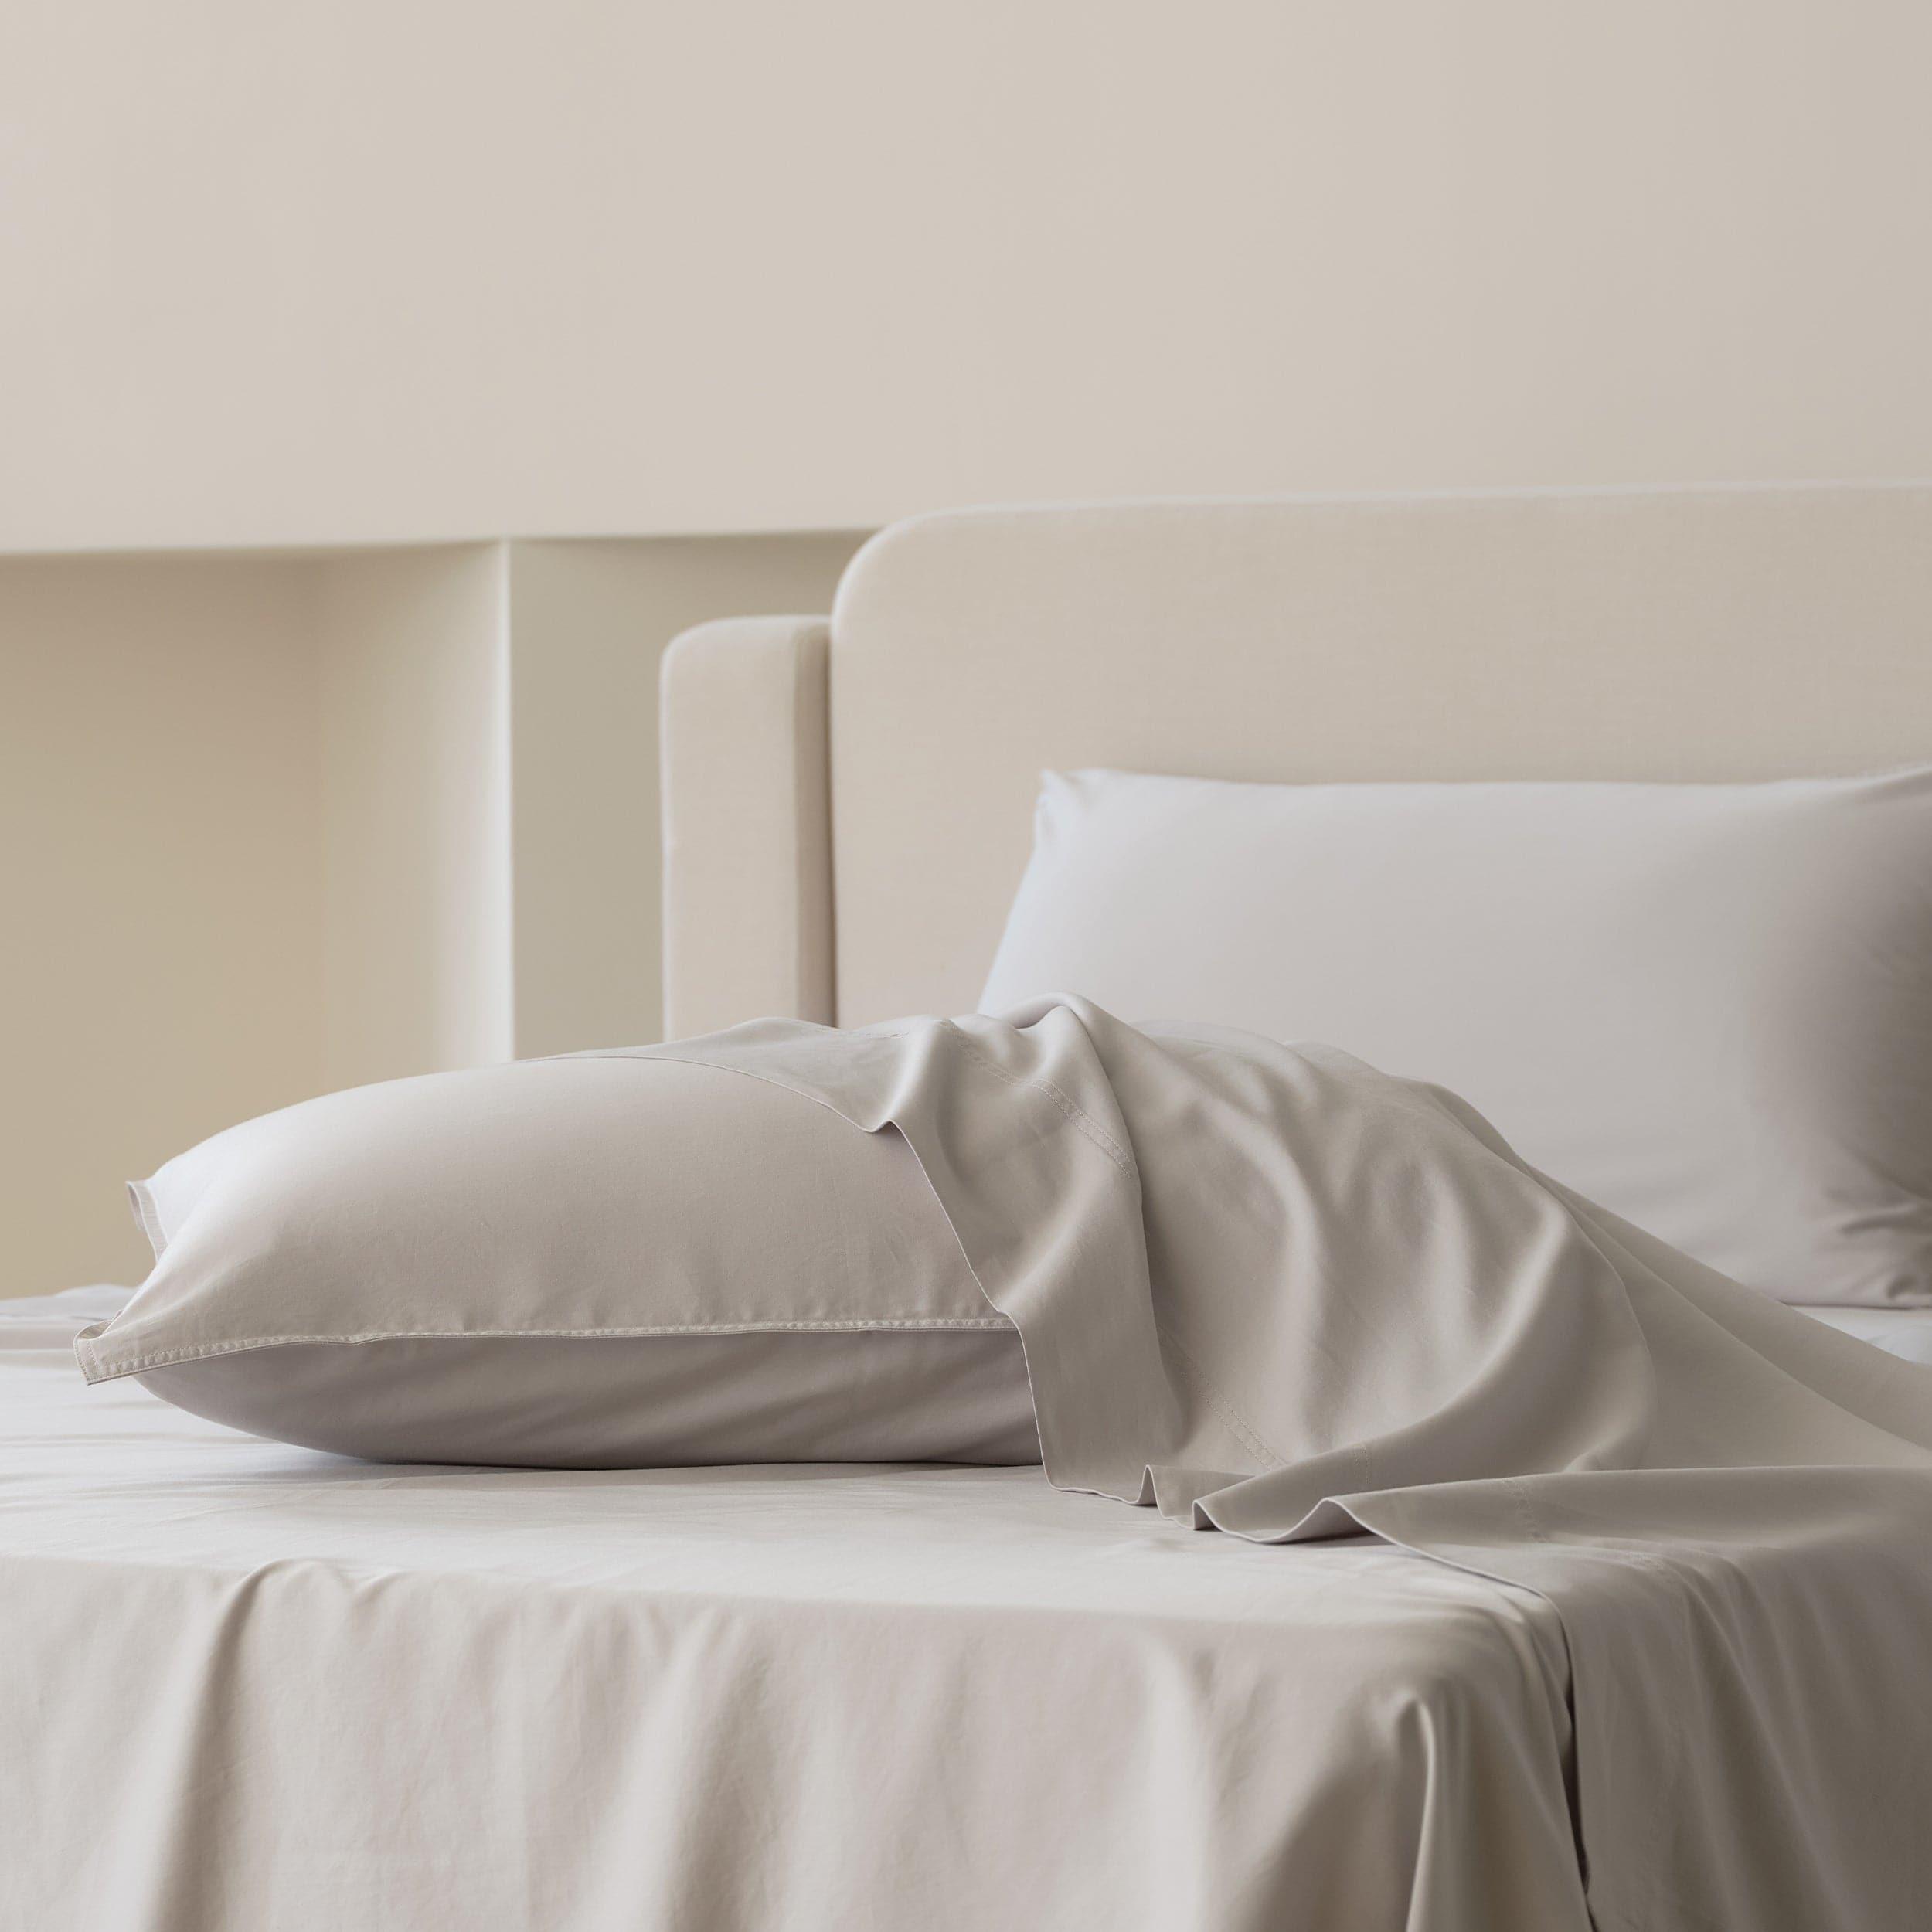 Keep your king size bed comfortable and stylish with a new sheet set.